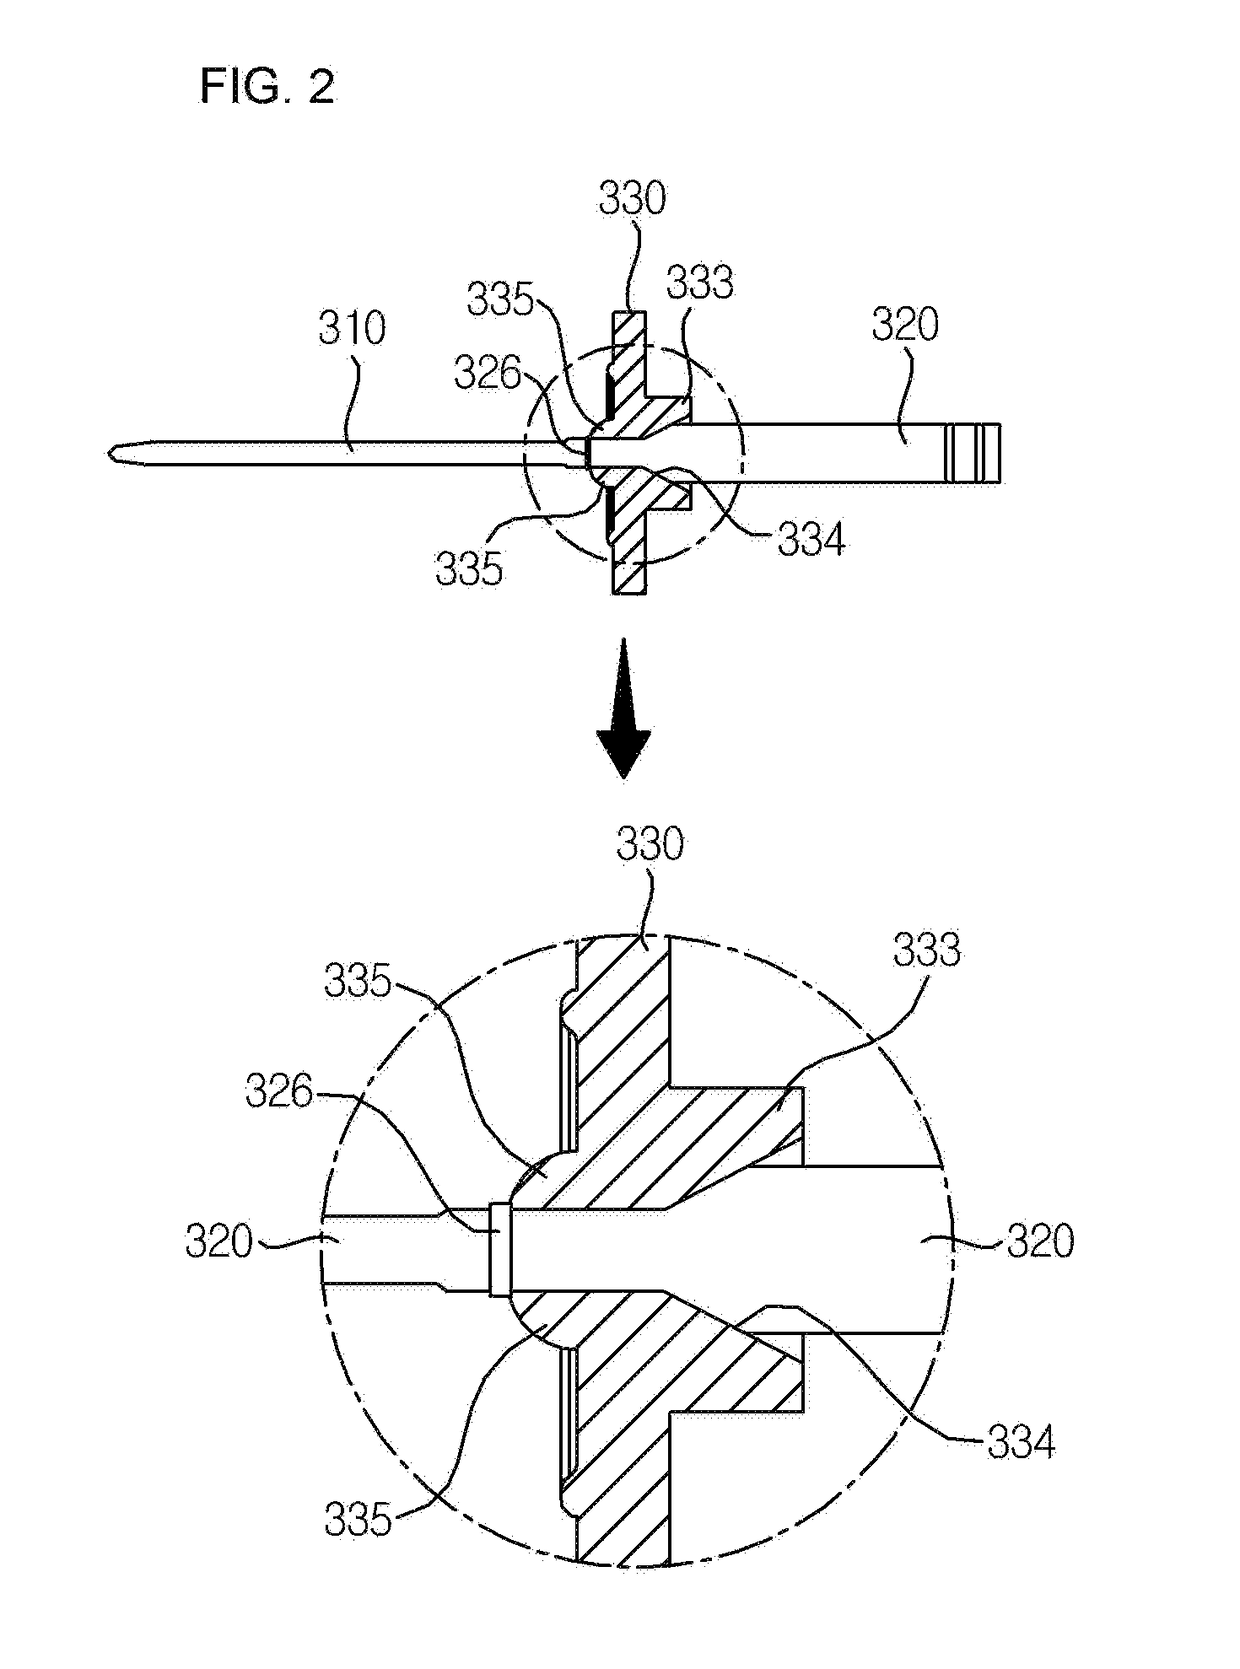 Cartridge for treating dental root and method for manufacturing needle for treating dental root